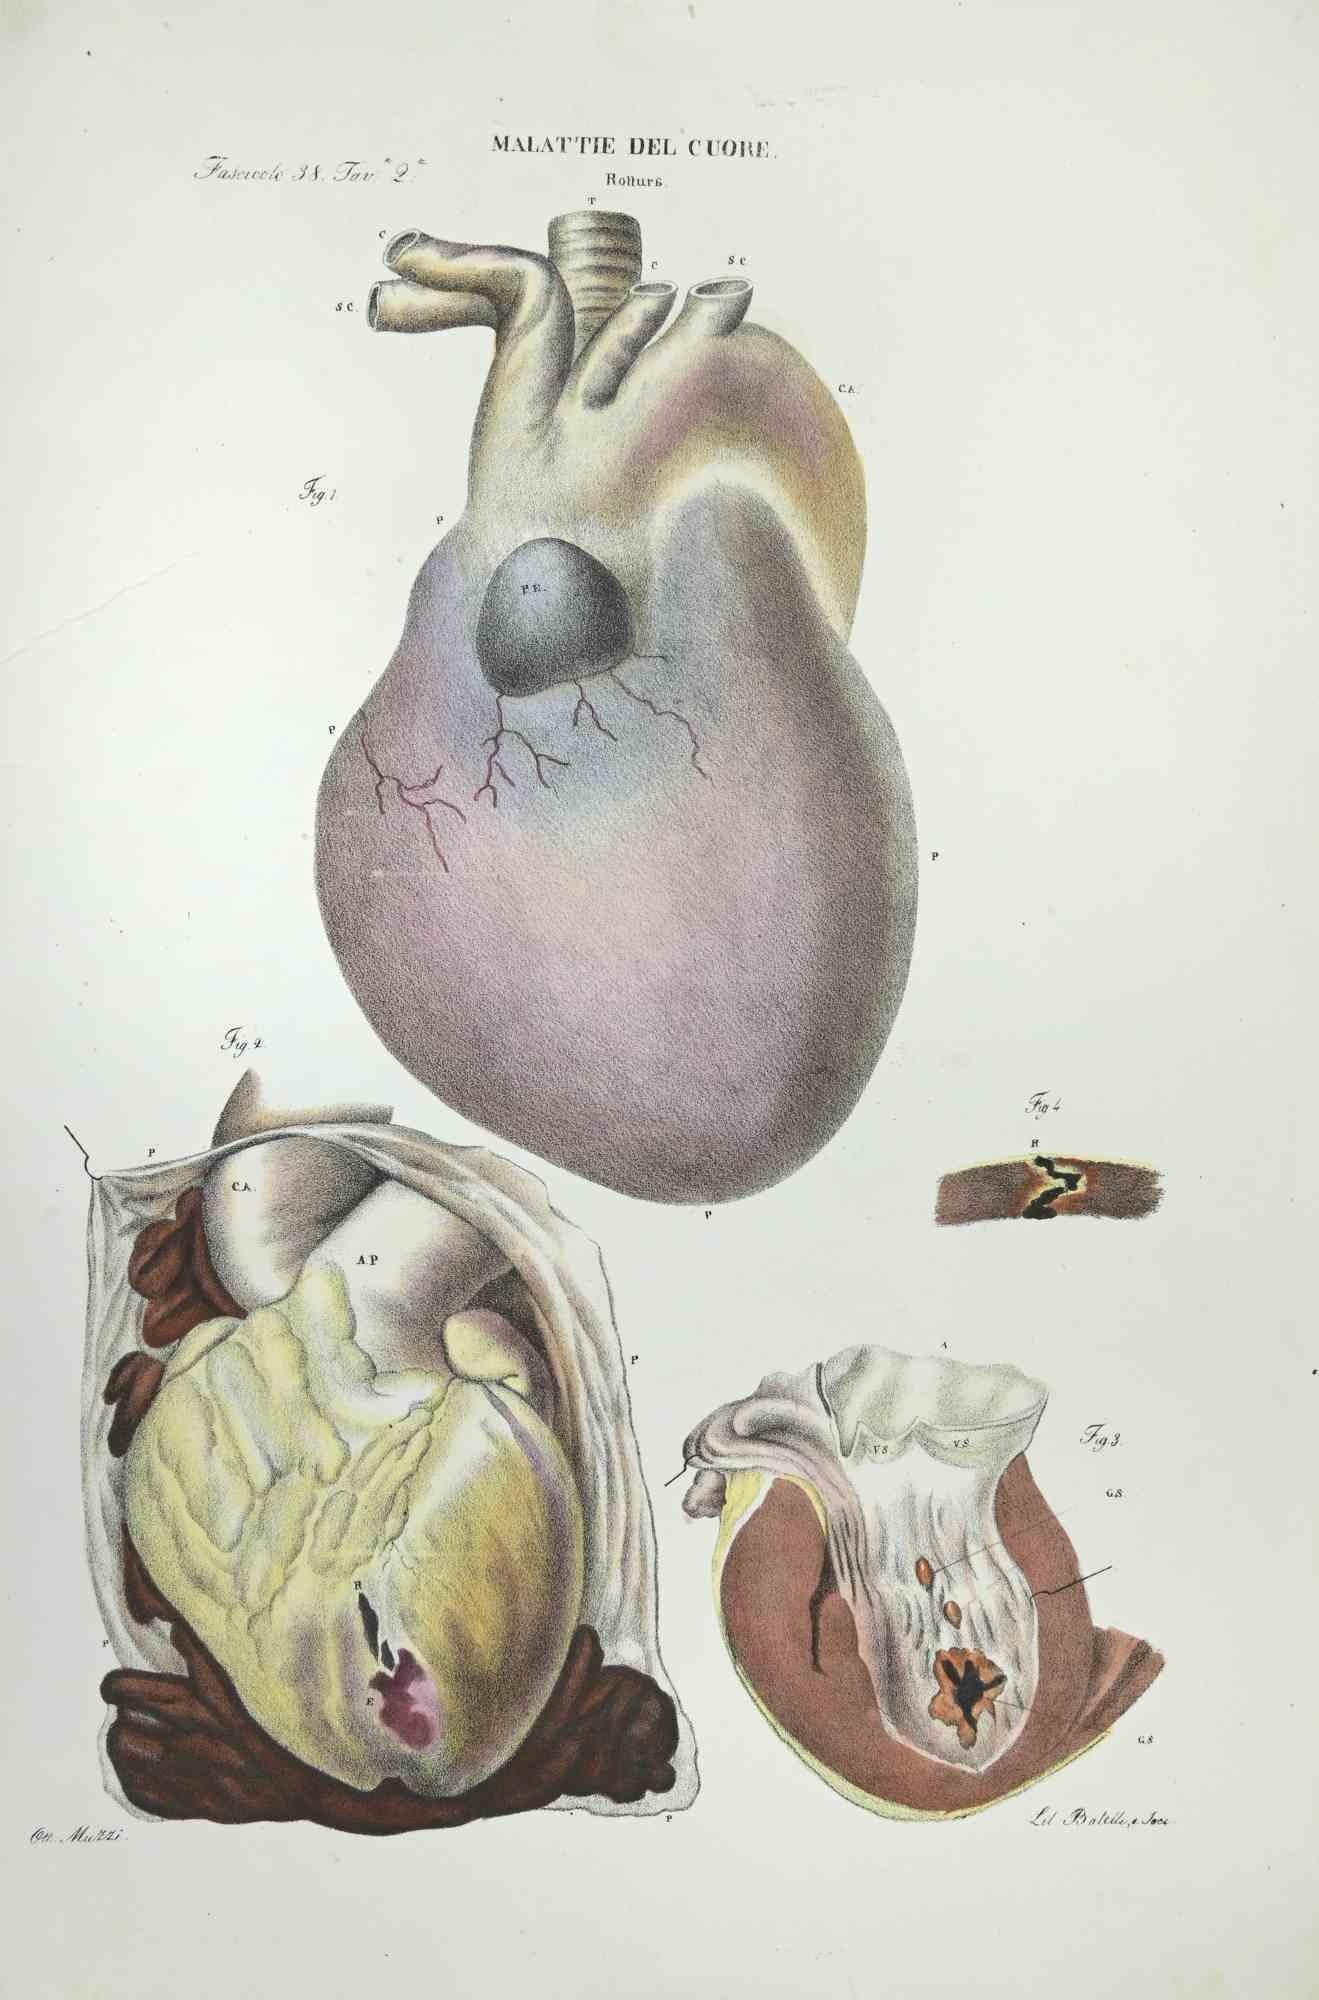 Heart Diseases is a lithograph hand colored by Ottavio Muzzi for the edition of Antoine Chazal,Human Anatomy, Printers Batelli and Ridolfi, realized in 1843.
Signed on plate on the lower left margin. 

The artwork belongs to the "Atlante Generale